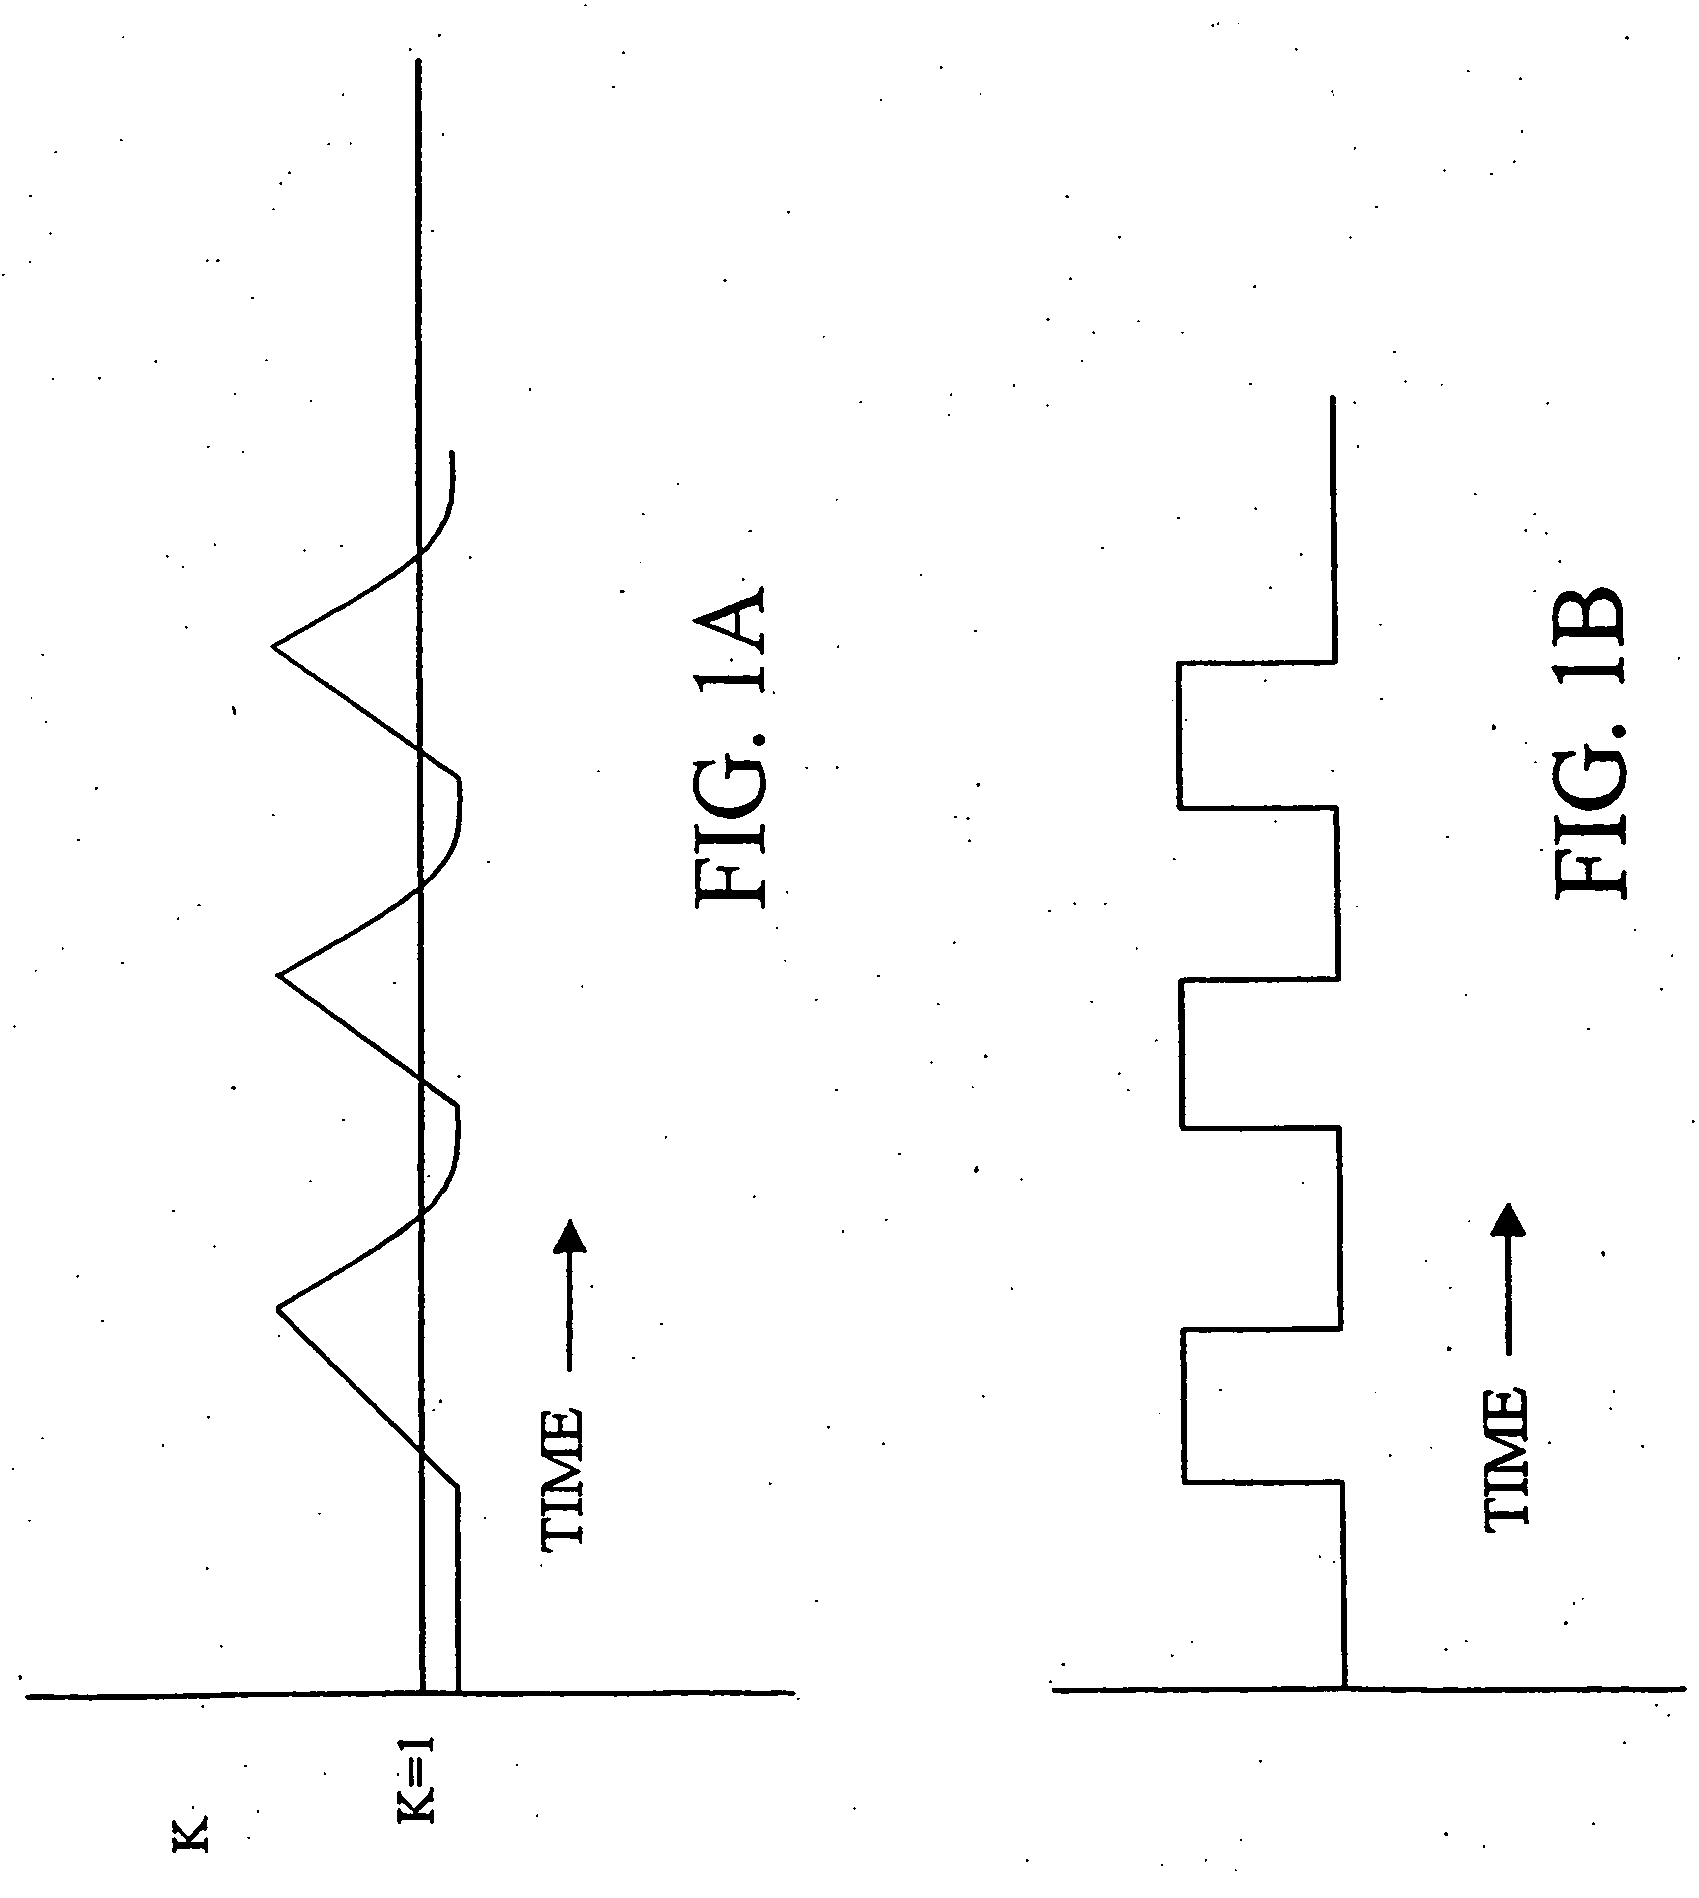 Generating short-term criticality in a sub-critical reactor